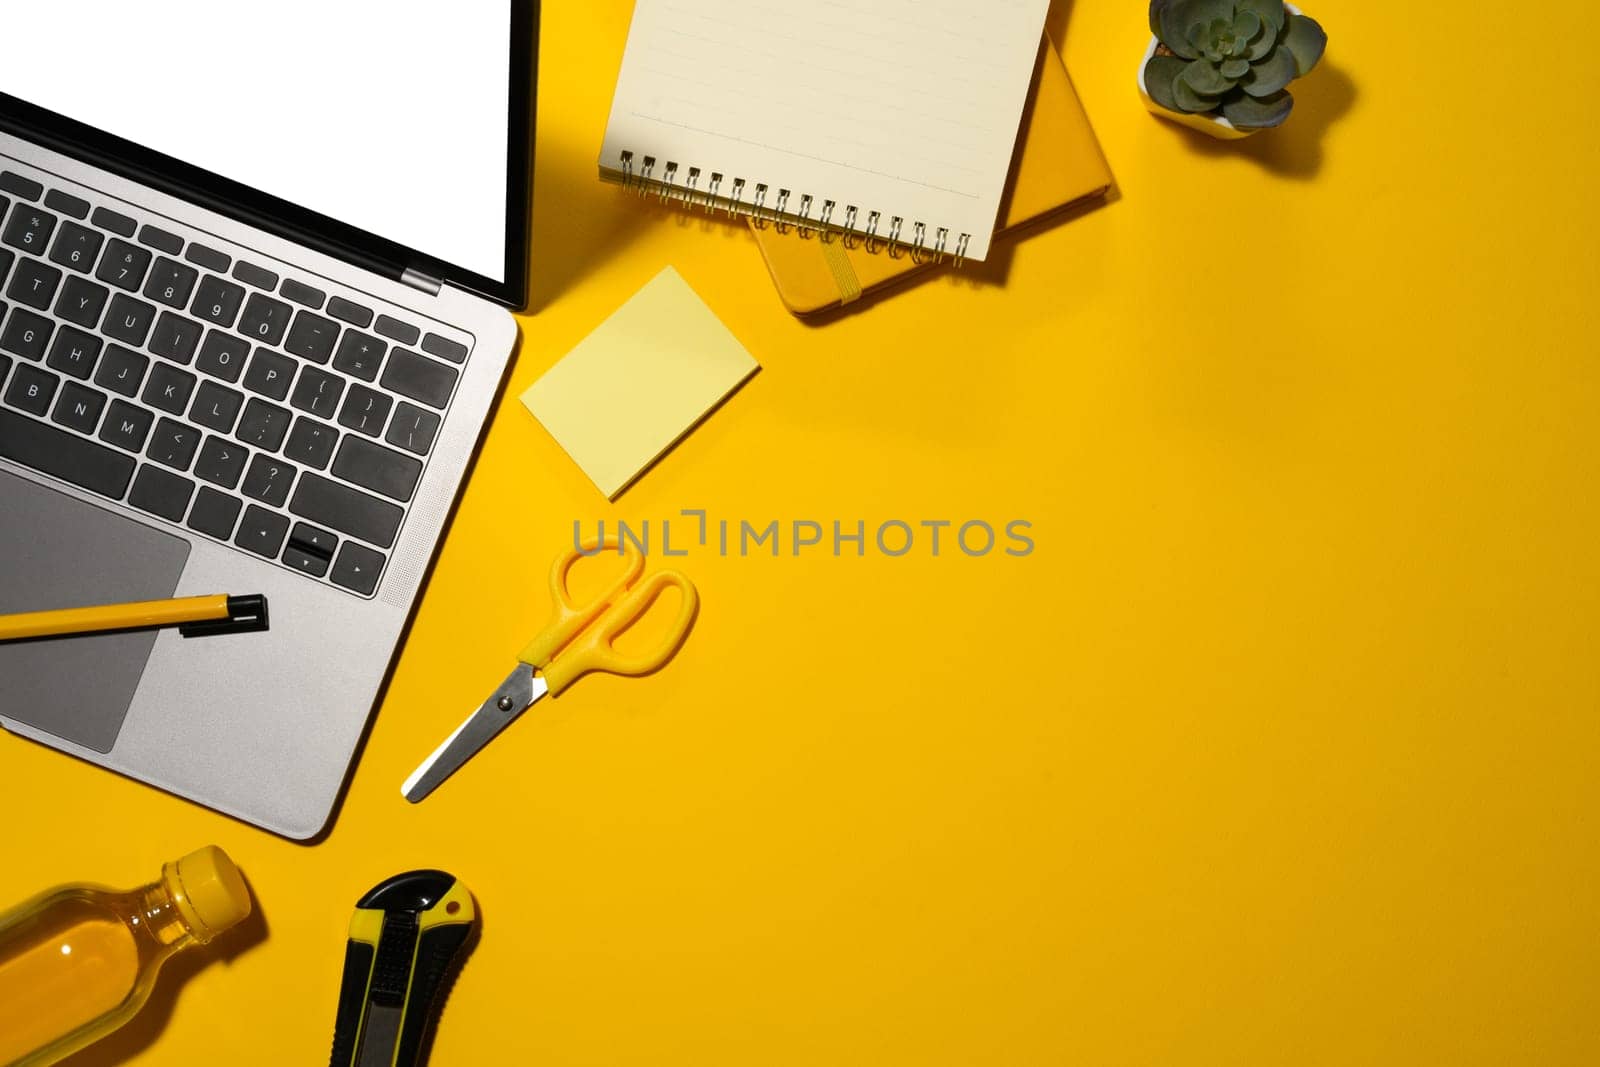 Top view of laptop with empty display, water bottle and office supplies on yellow background.